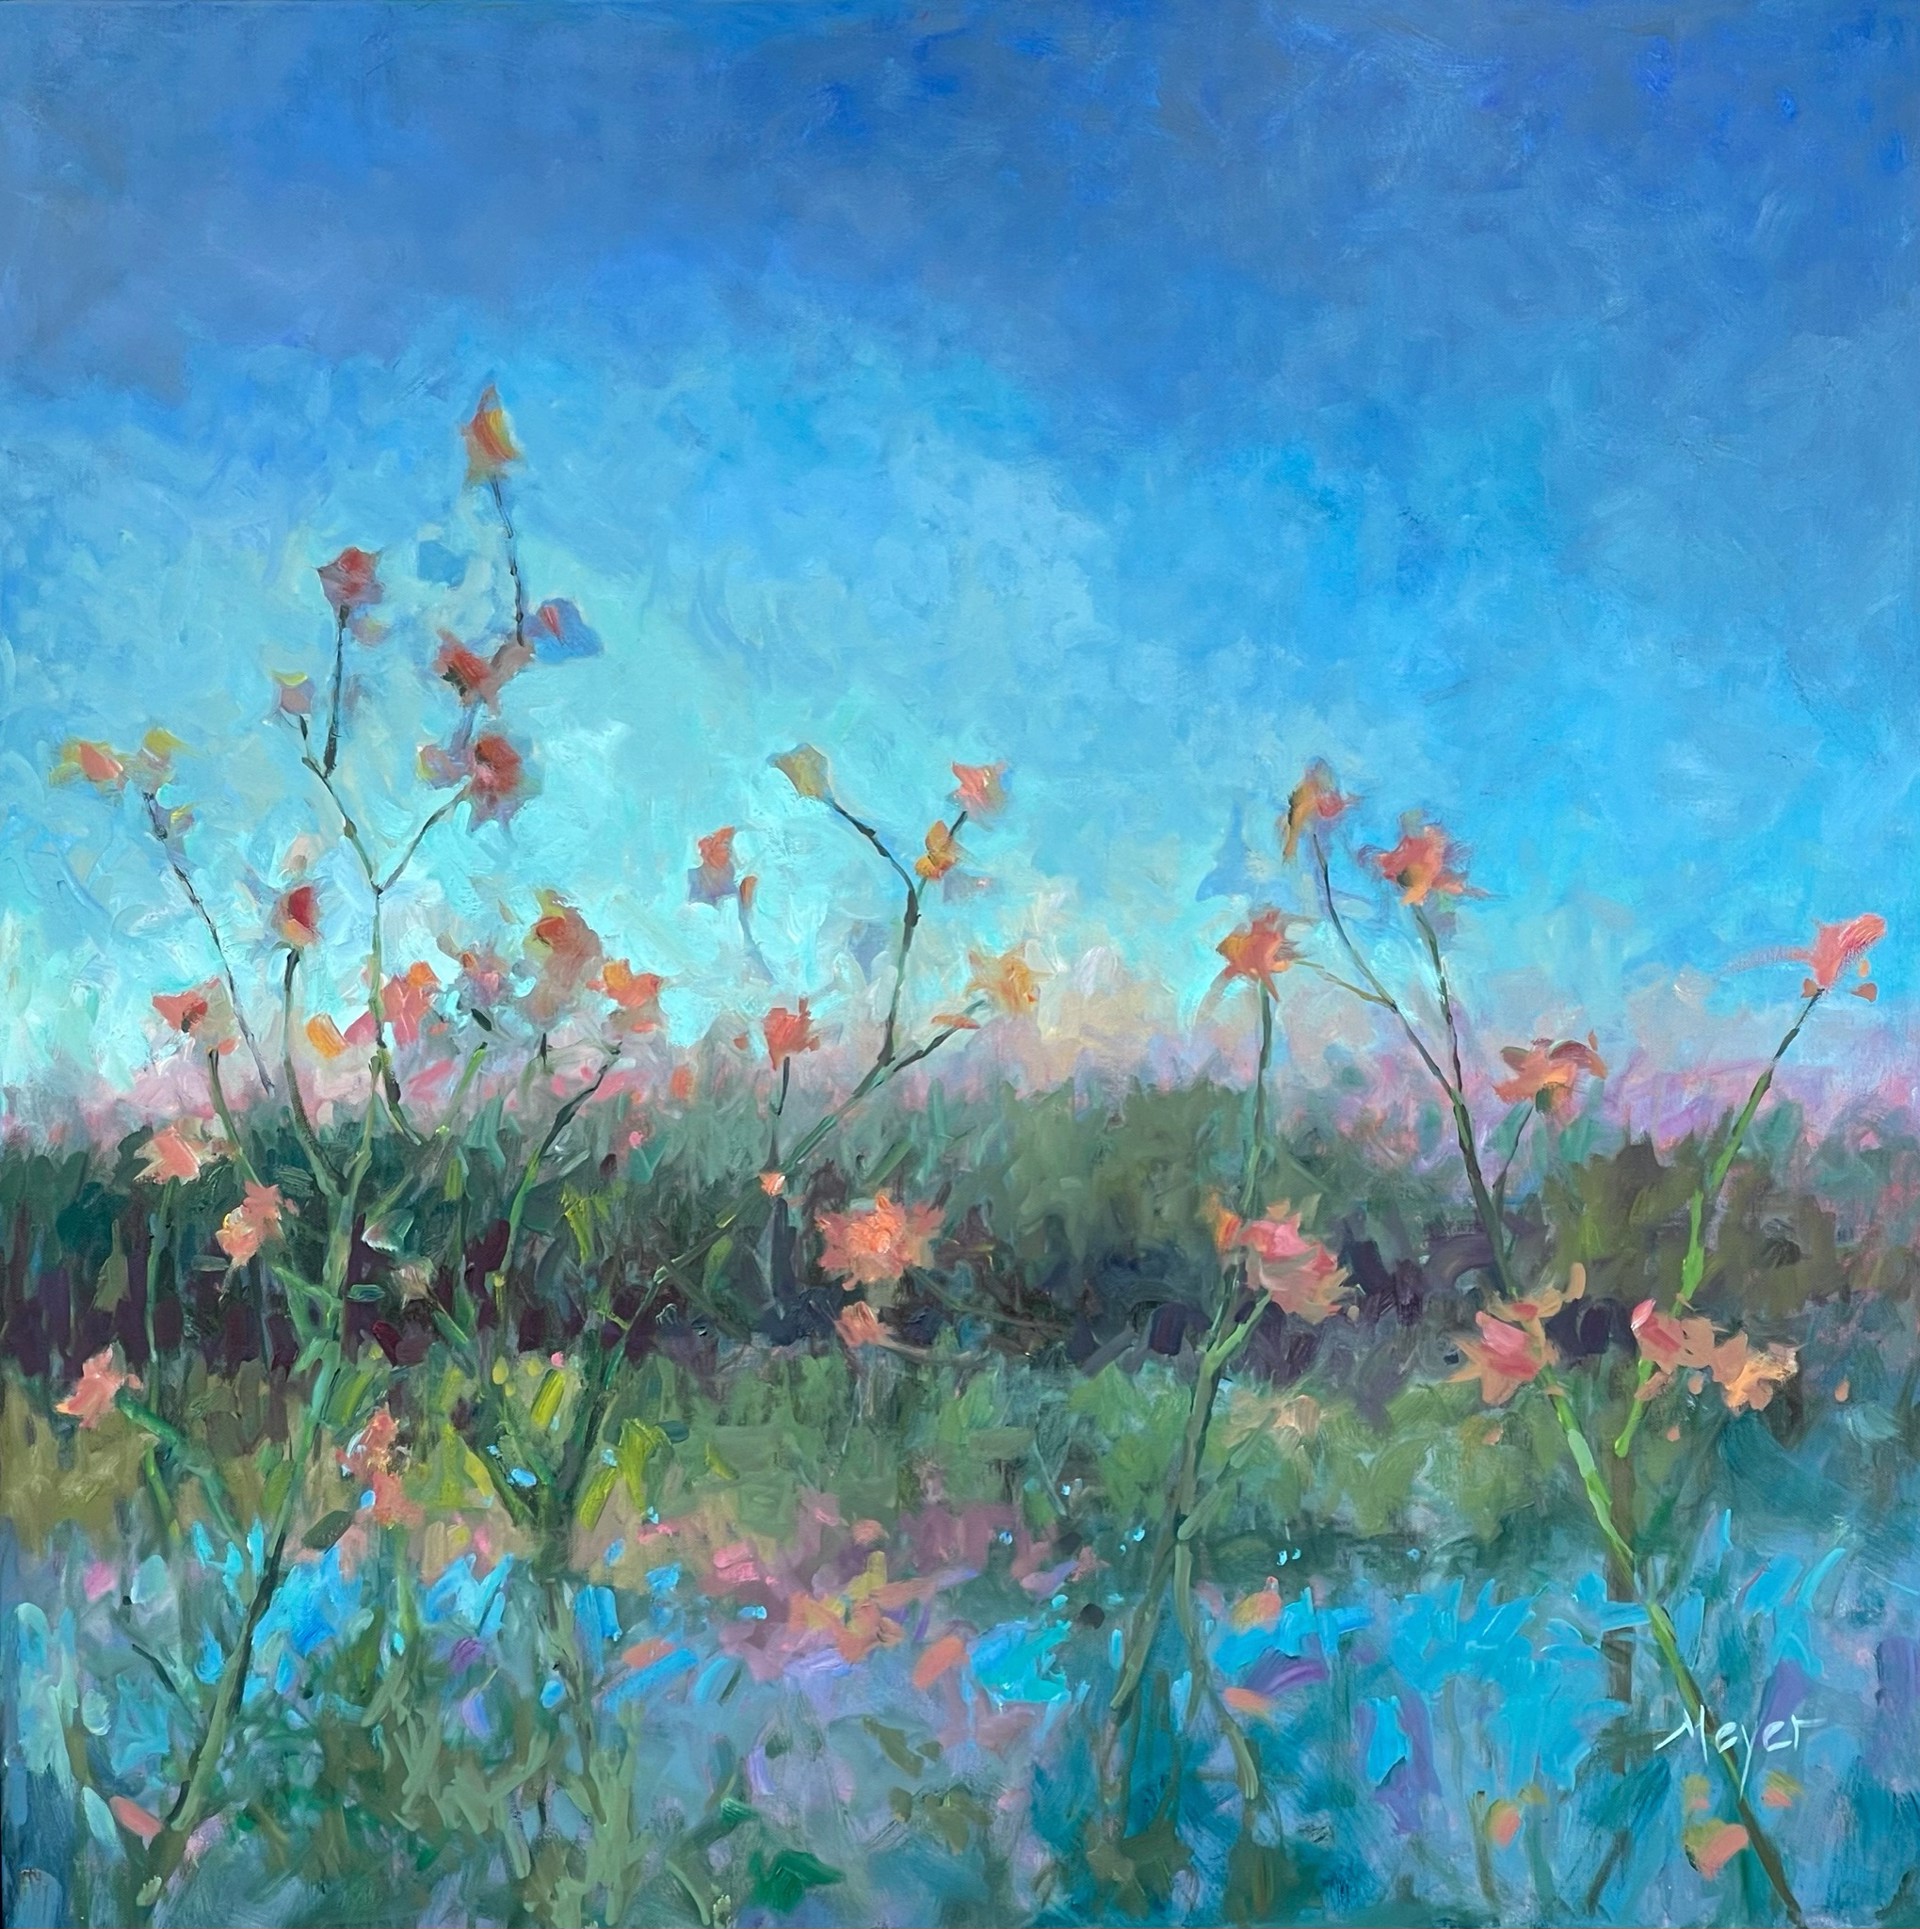 You Belong Among the Wildflowers by Laurie Meyer